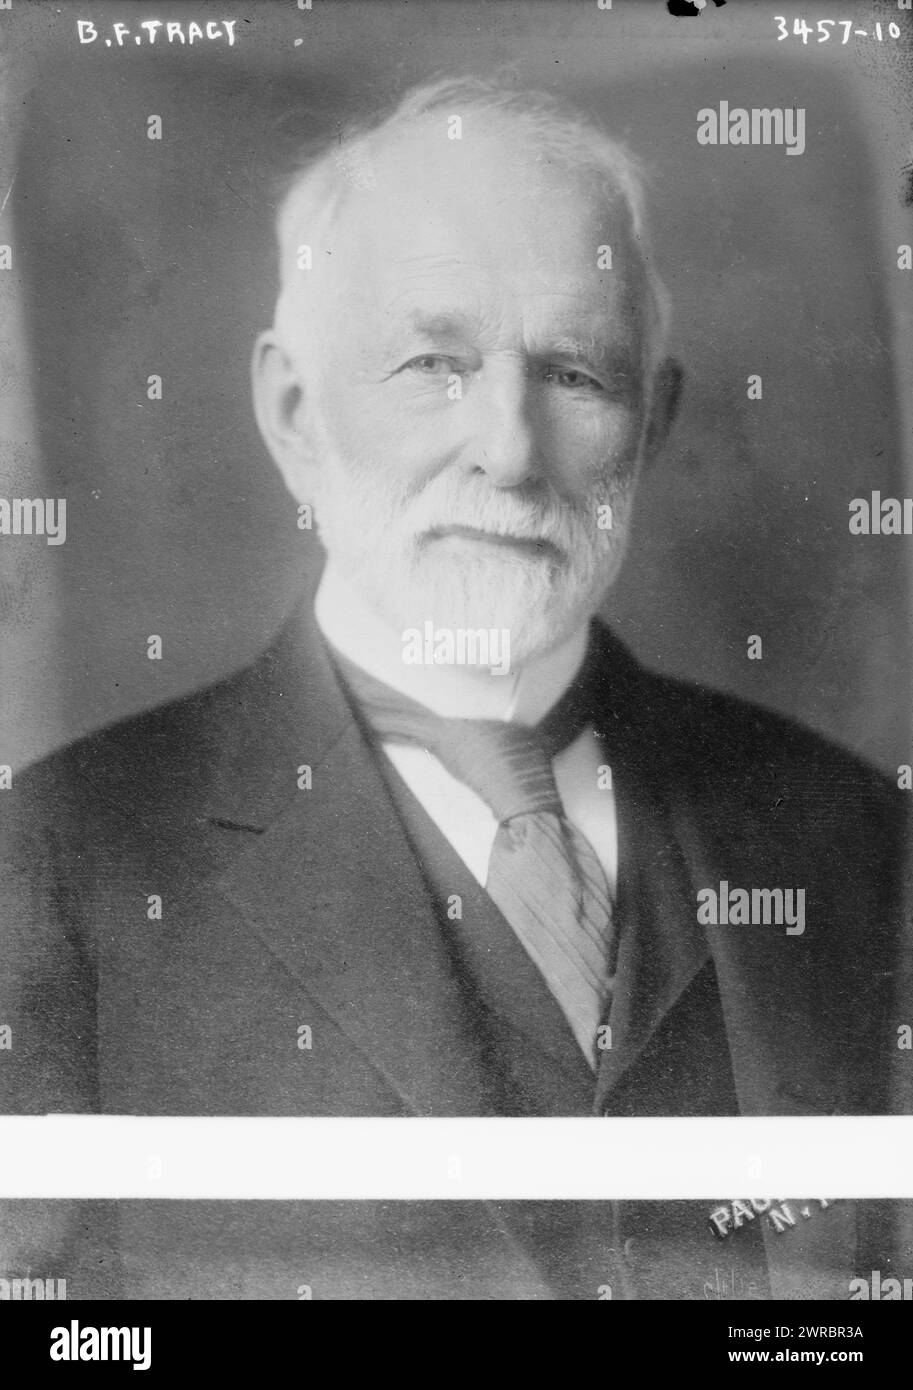 B.F. Tracy, Photograph shows politician Benjamin Franklin Tracy (1830-1915) who served as Secretary of the Navy from 1889 to 1893., between ca. 1910 and ca. 1915, Glass negatives, 1 negative: glass Stock Photo